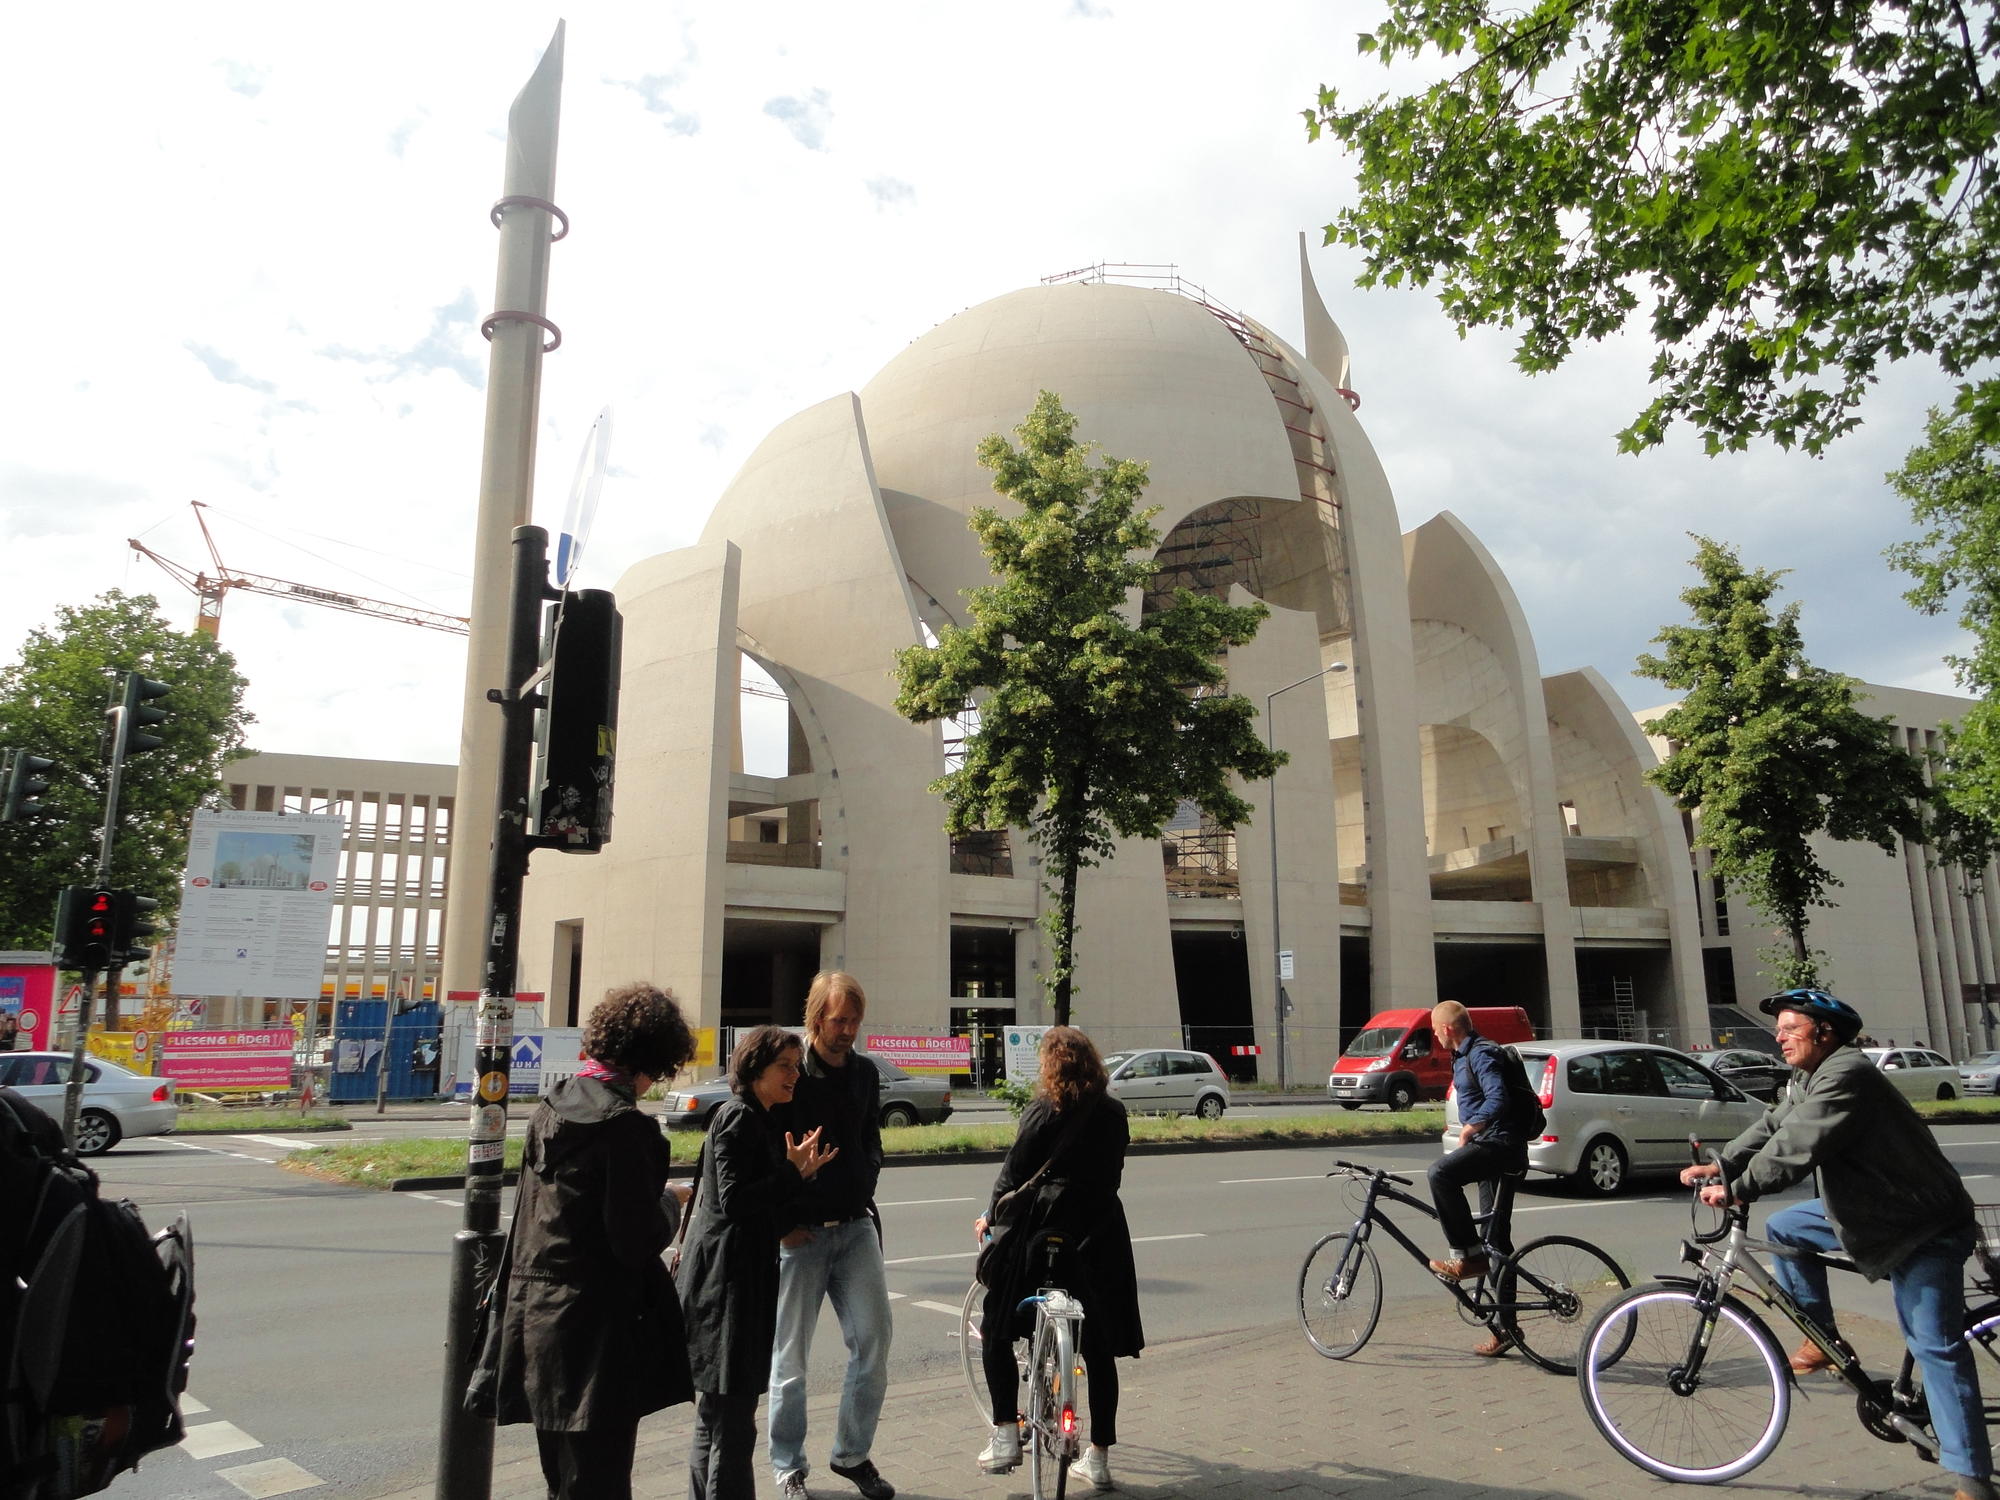 The biggest mosque of Germany, located in Köln Ehrenfeld, in its construction phase